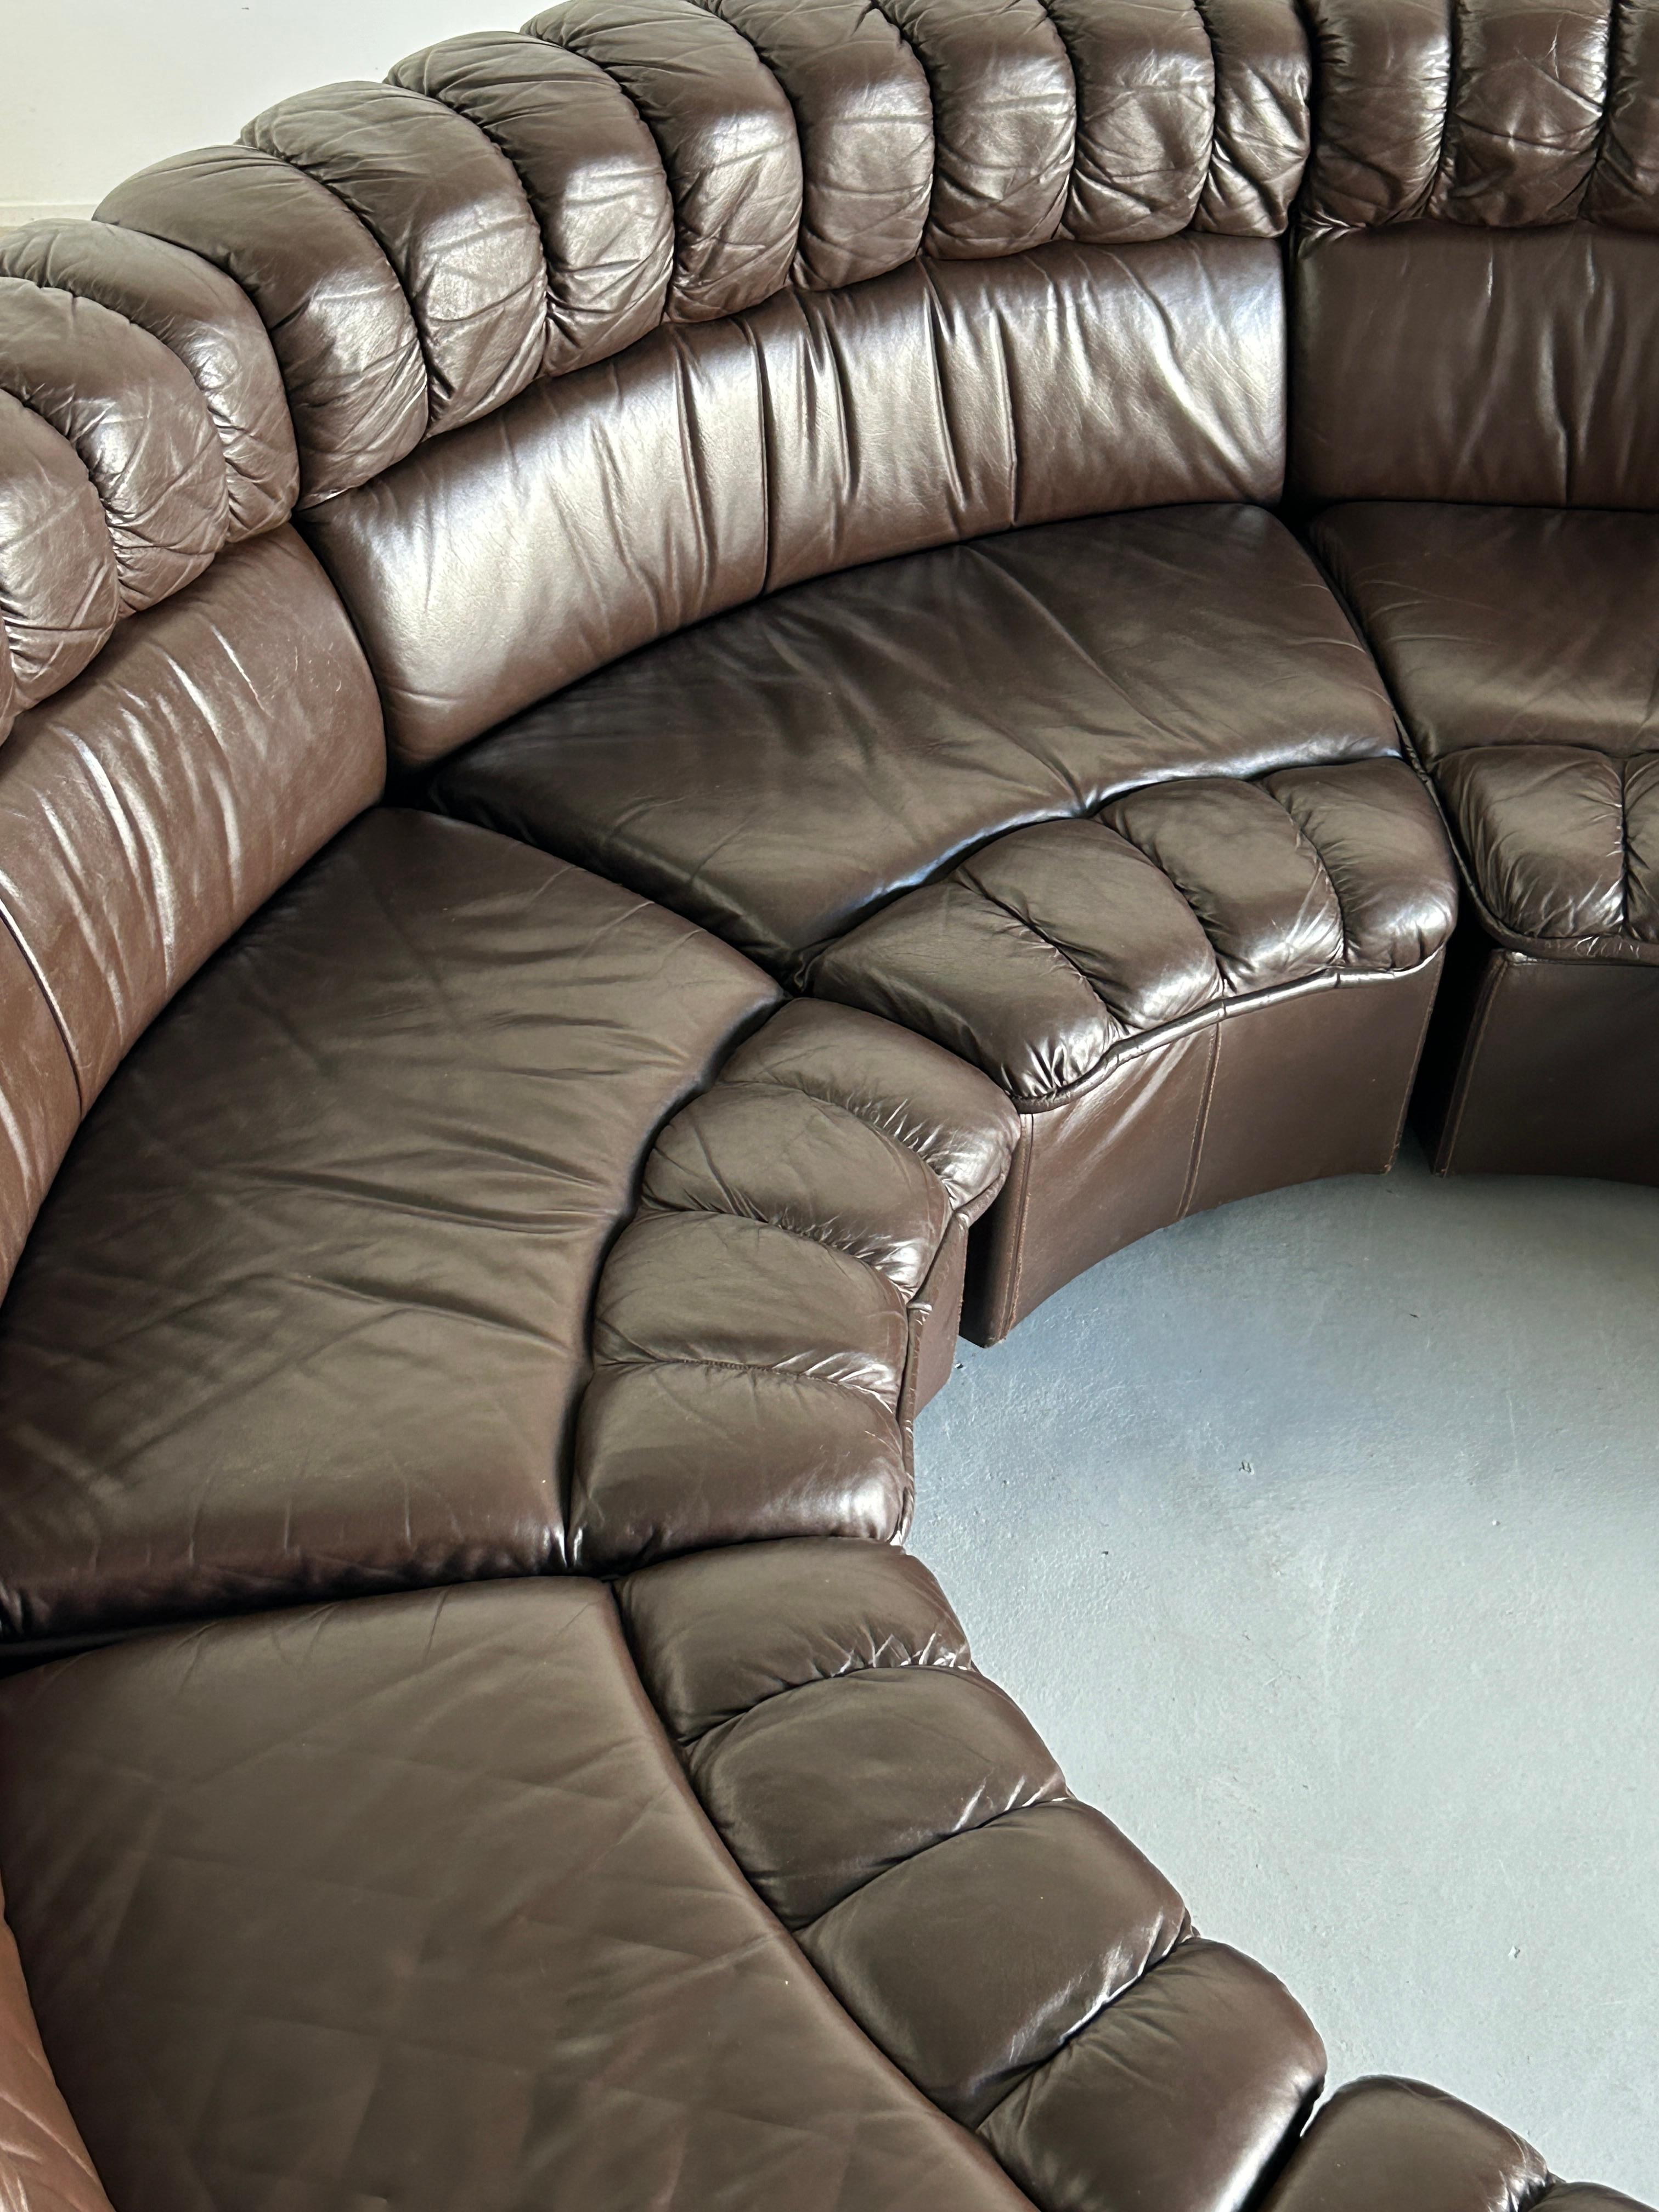 Mid-Century-Modern Leather Snake Sofa in style of De Sede DS-600 Non-Stop, 1970s For Sale 8